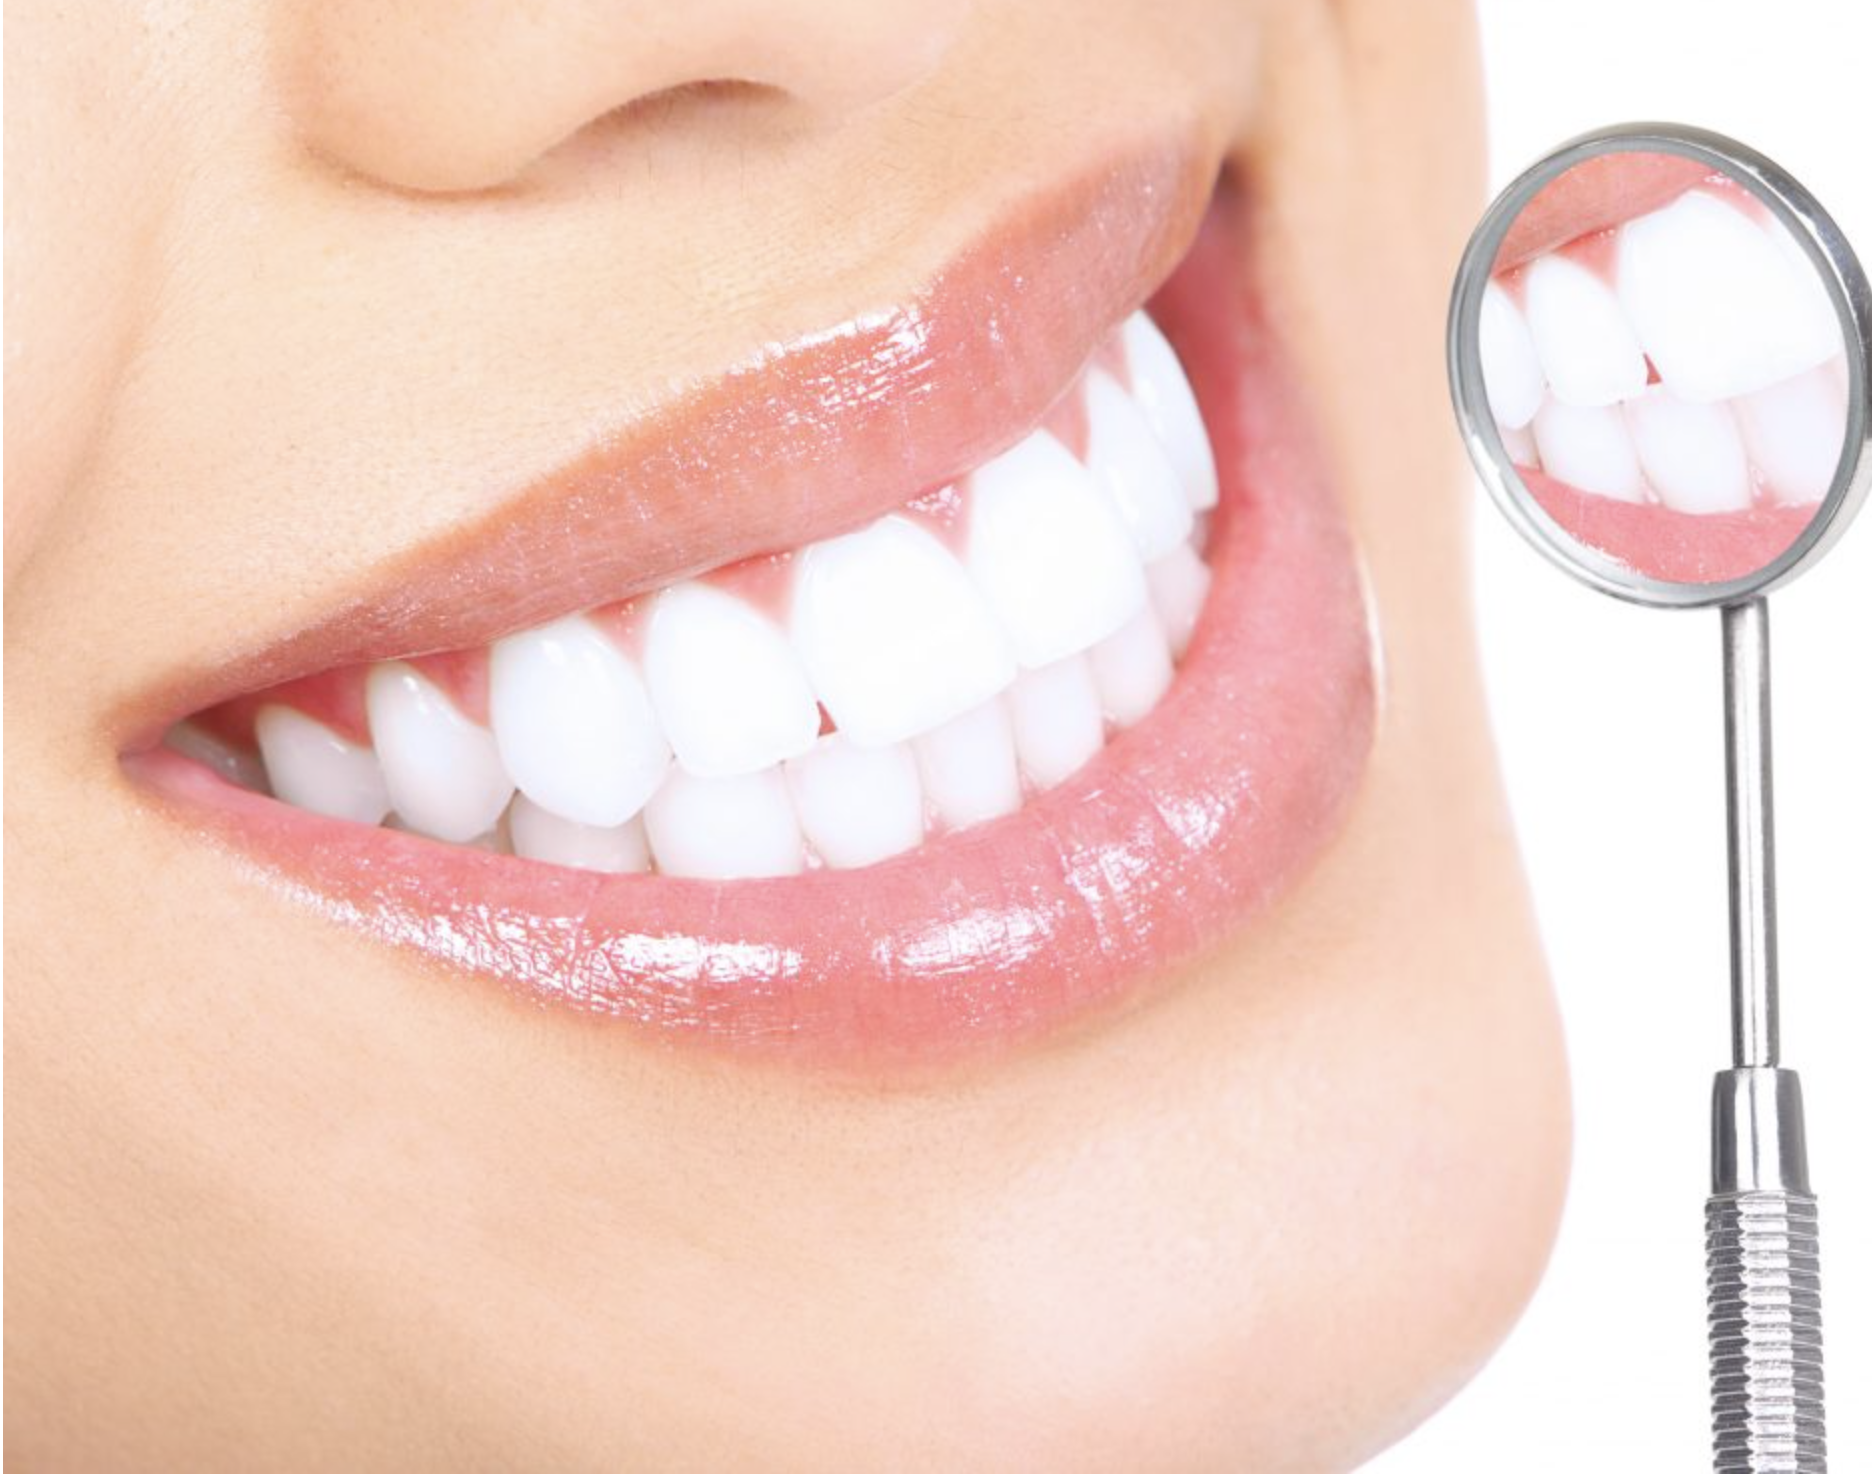 Croes Cosmetic & Emergency Denture Clinic - Dental Implants-Implantology